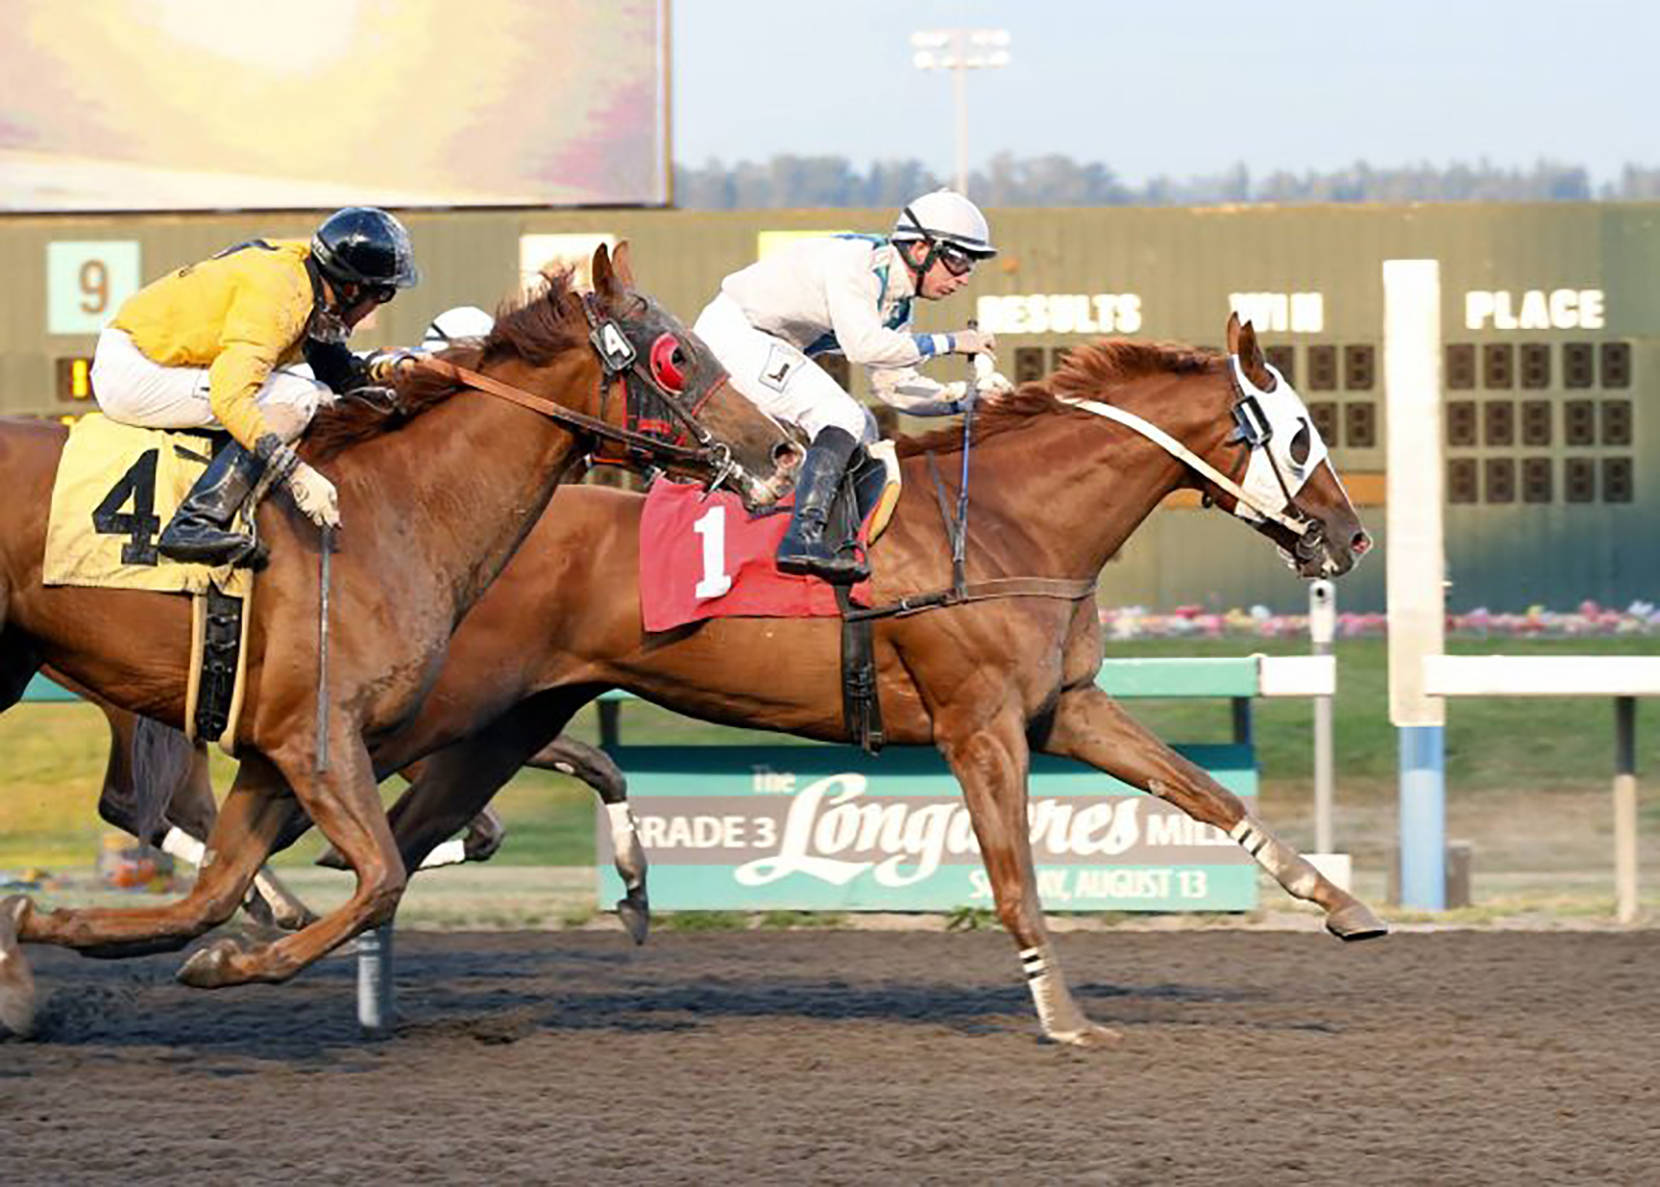 Blackford, with Julien Couton up, roll to an upset win in the $11,200 Muckleshoot Casino Purse on Monday evening at Emerald Downs. COURTESY PHOTO